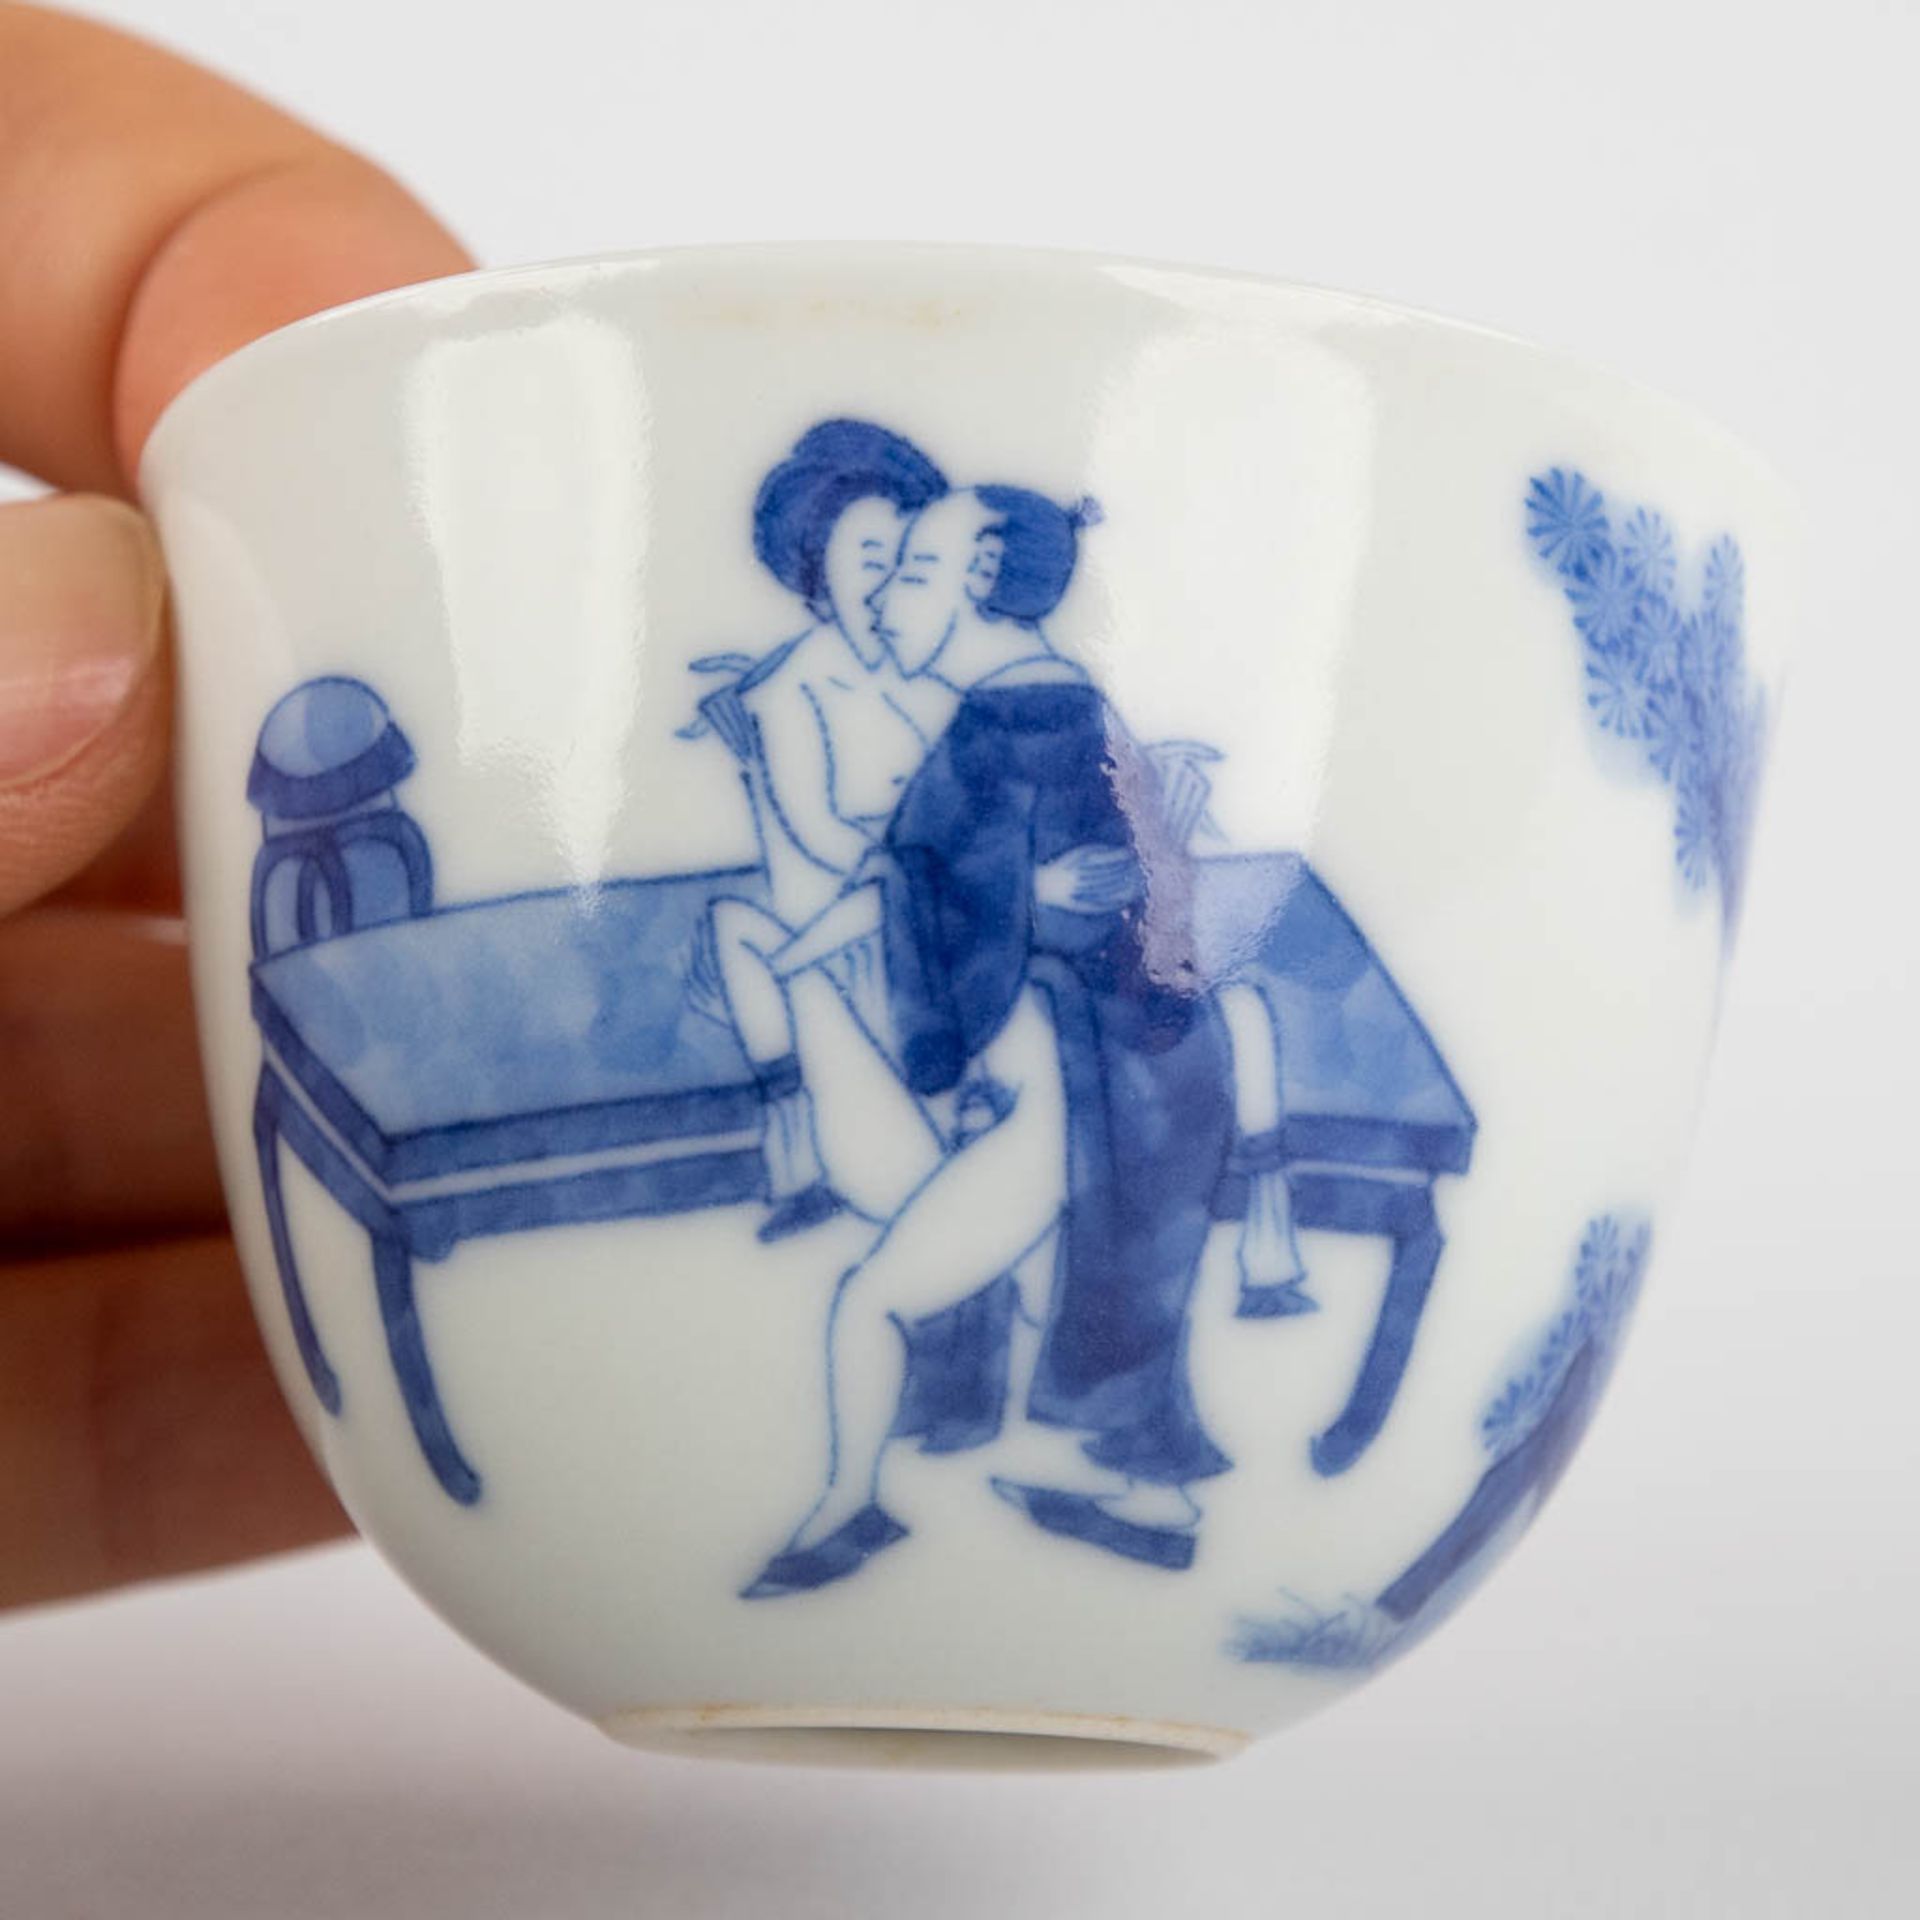 A small Chinese teacup with blue-white erotic scène, Chenghua mark, 19th/20th C. (H:4,5 x D:6,2 cm) - Image 10 of 11